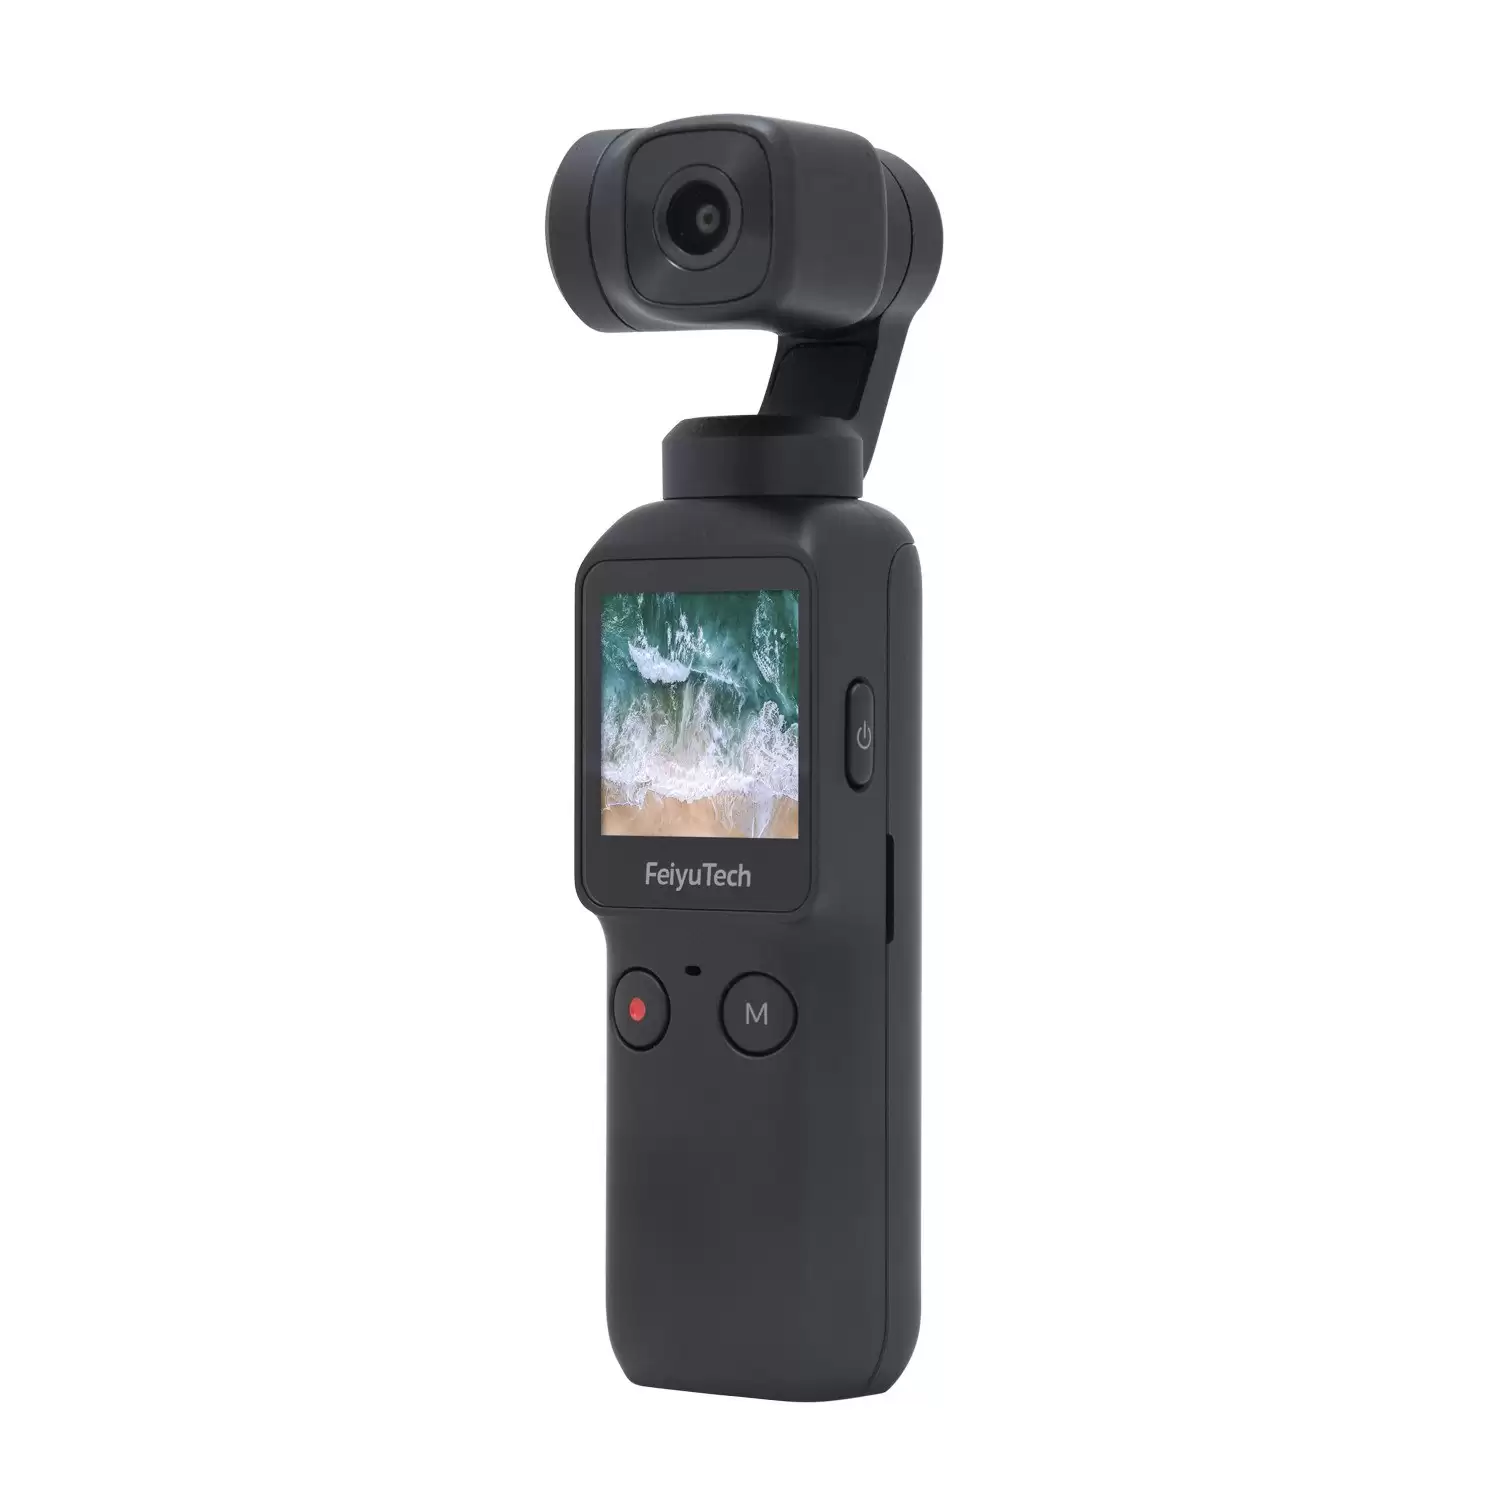 Get Extra $60 Discount On Feiyu Pocket 6-Axis Stabilized Handheld Gimbal Camera With This Discount Coupon At Tomtop